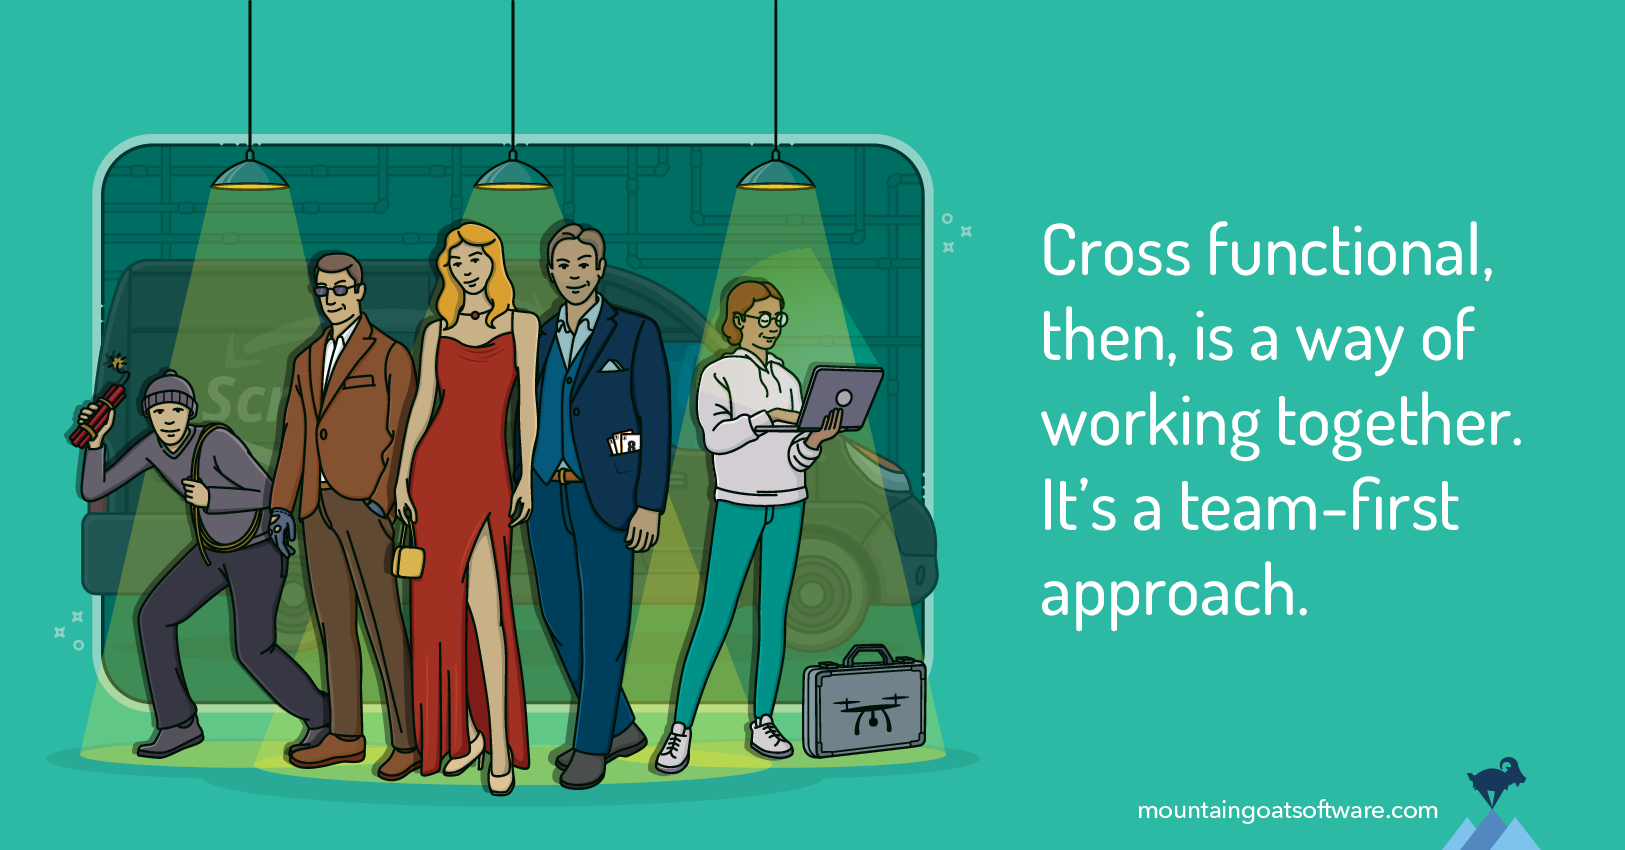 What Does Scrum Mean by Cross Functional Teams?